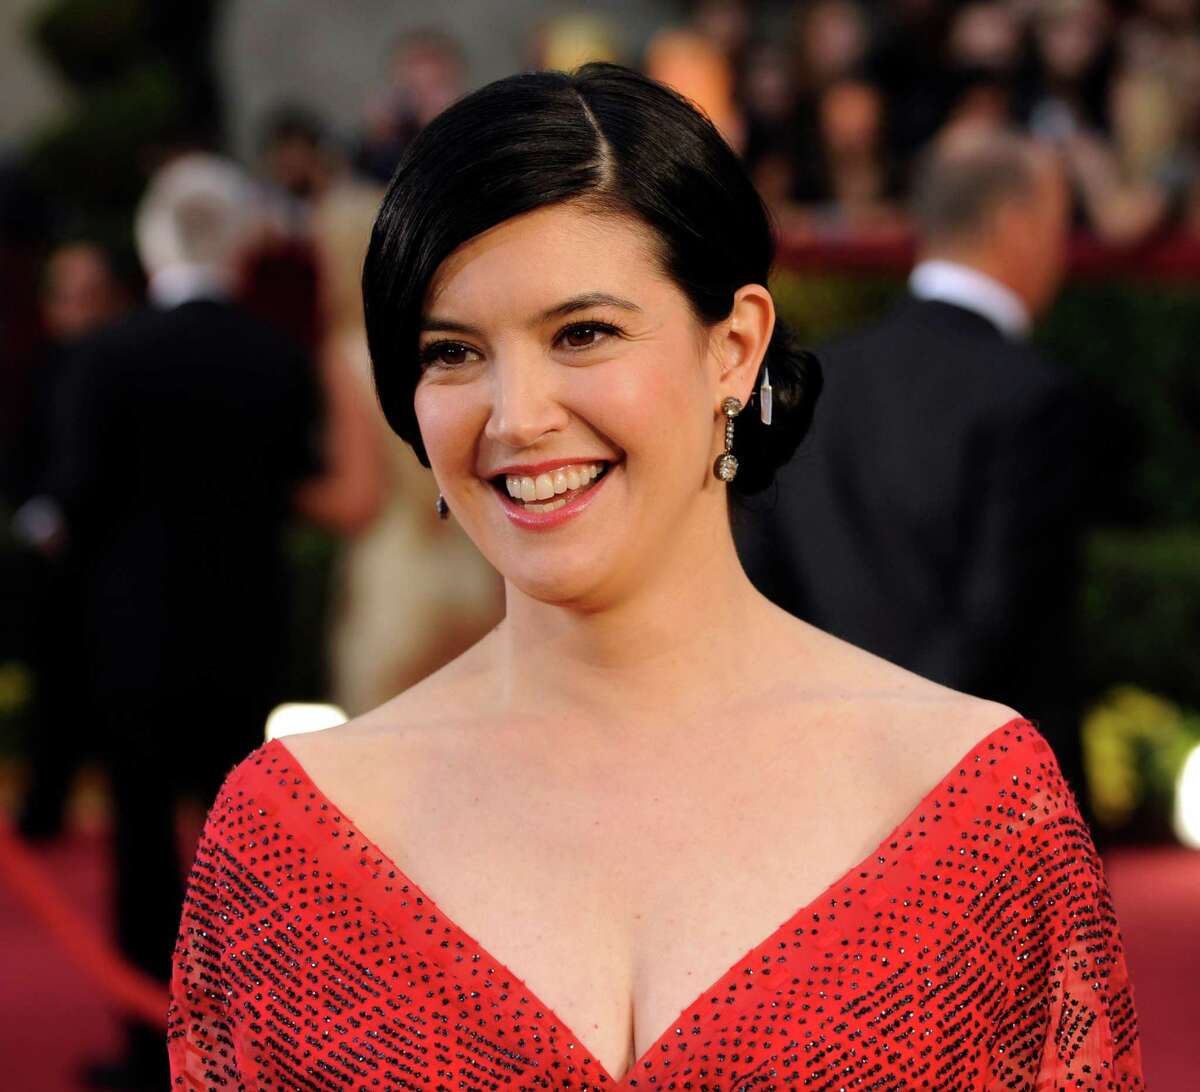 Actress Phoebe Cates arrives for the 81st Academy Awards Sunday, Feb. 22, 2009, in the Hollywood section of Los Angeles. (AP Photo/Chris Pizzello)